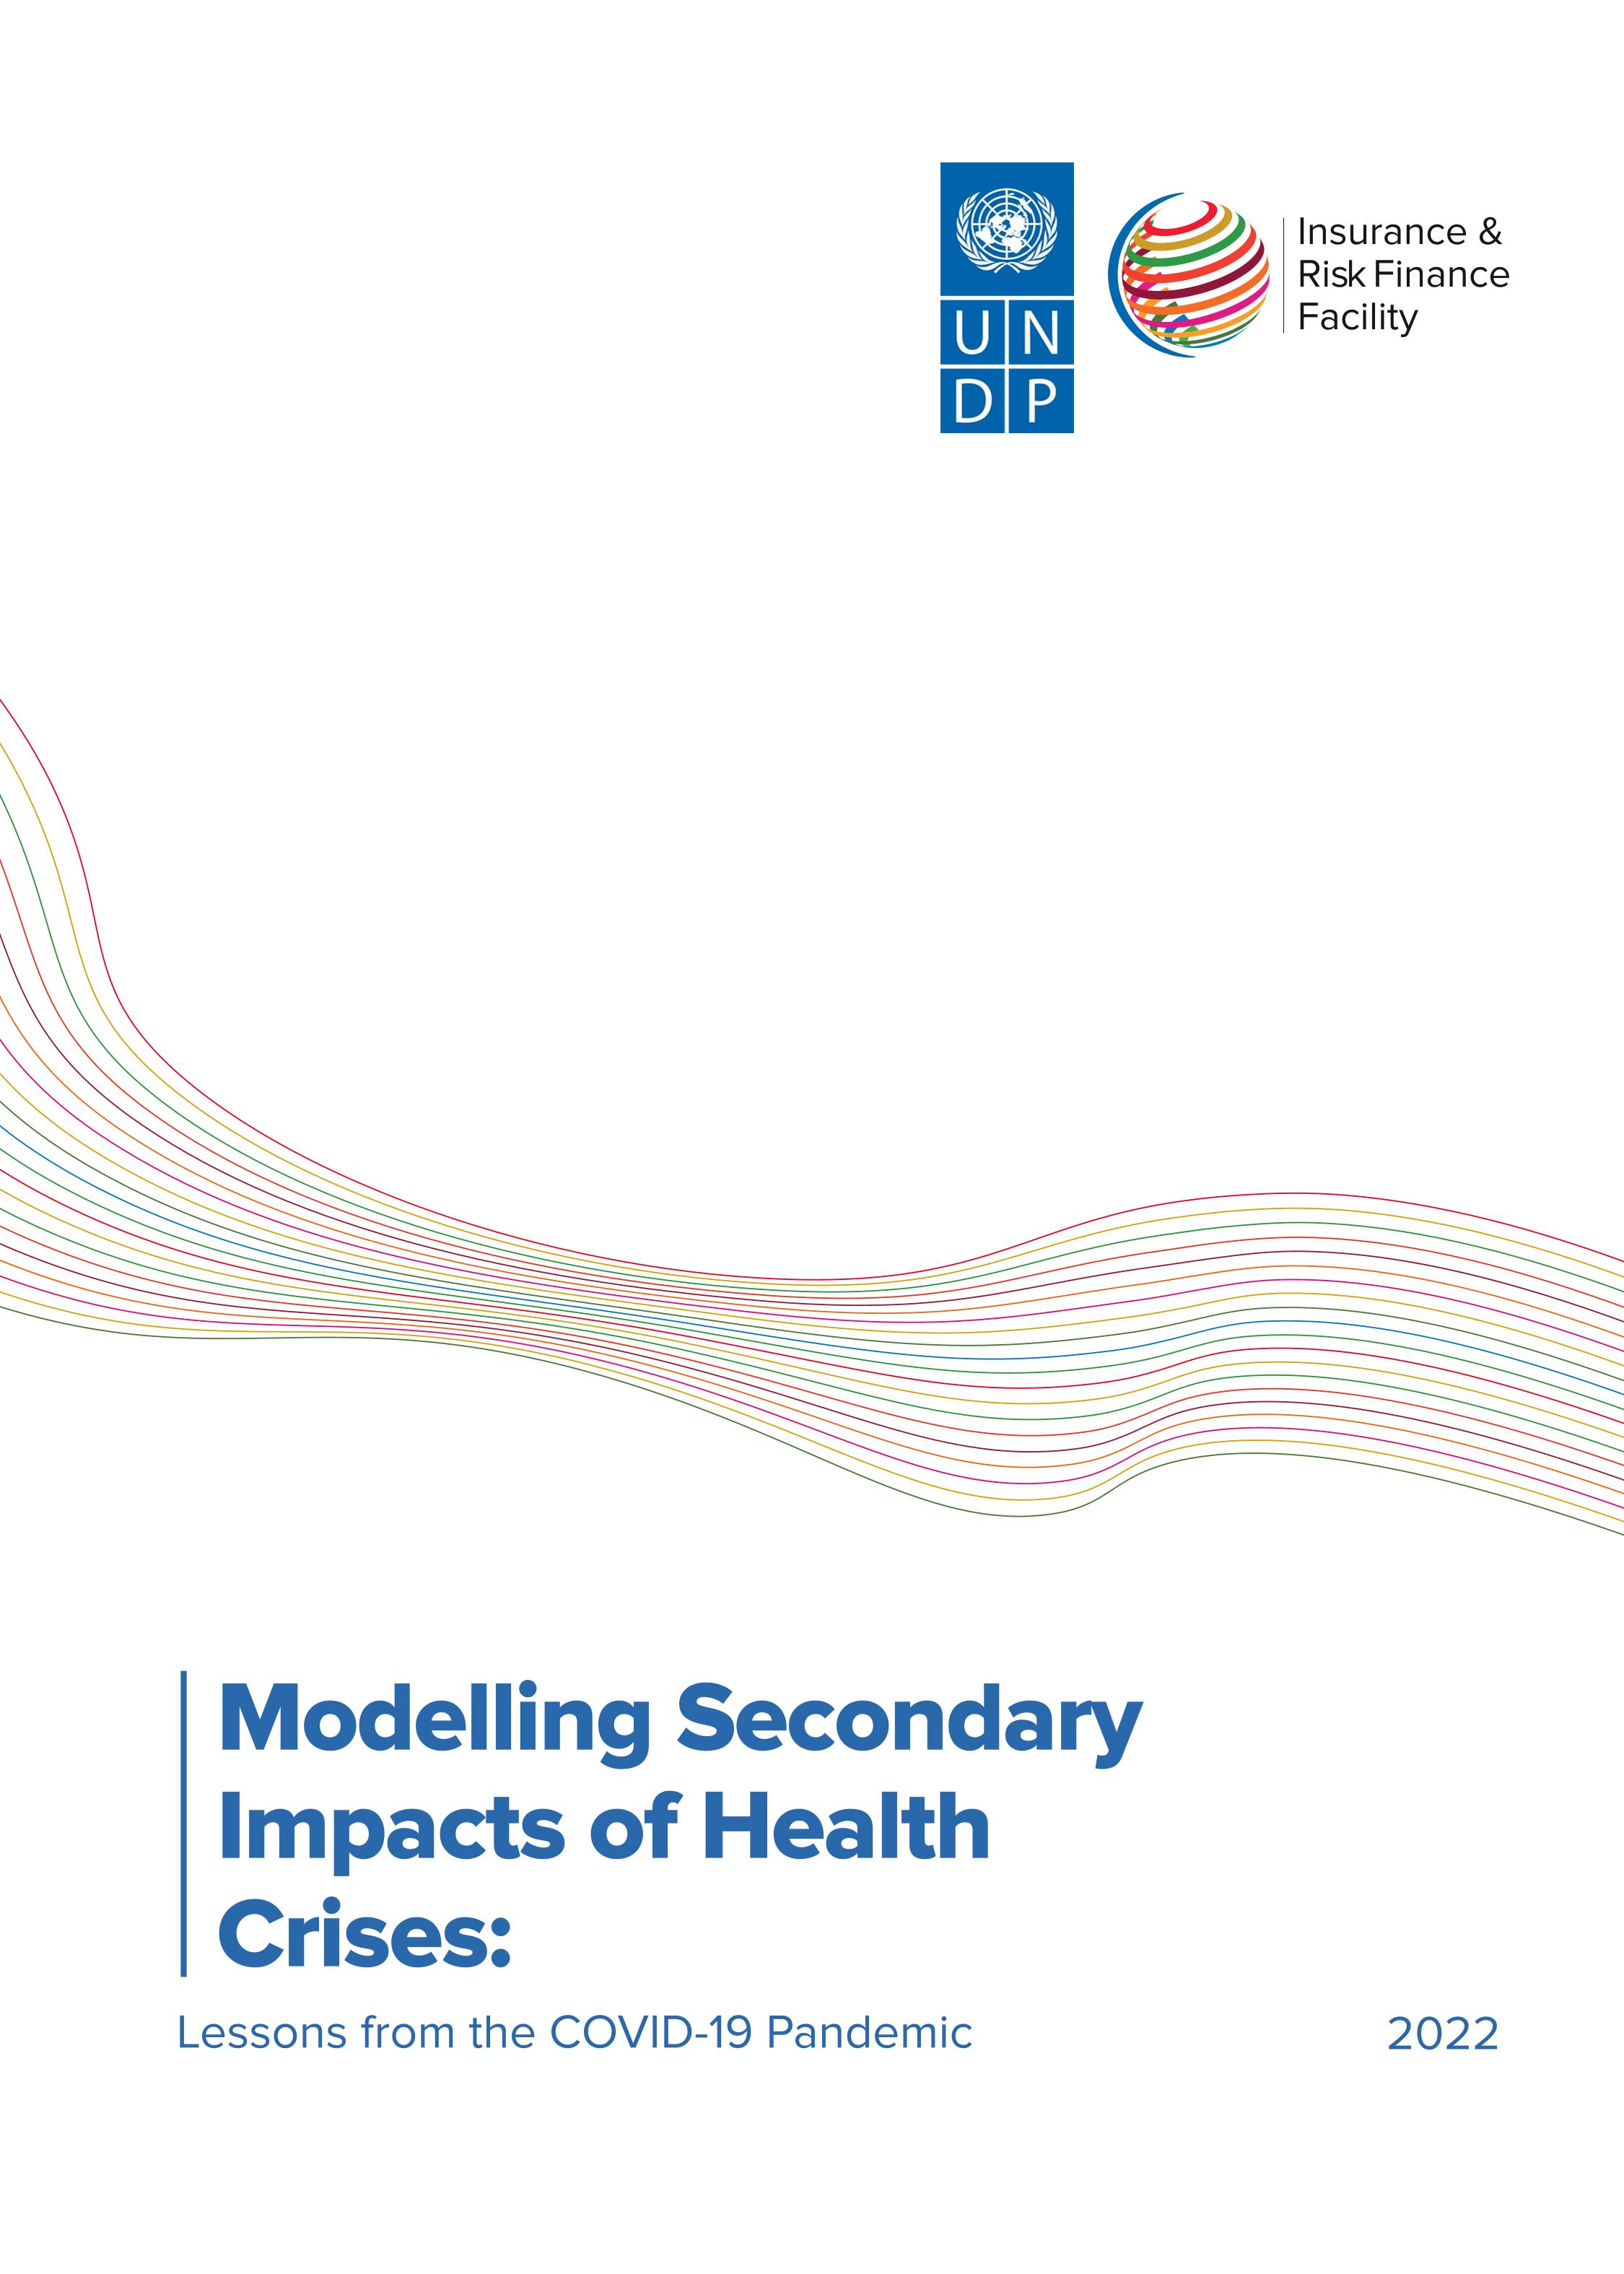 Modelling Secondary Impacts of Health Crises